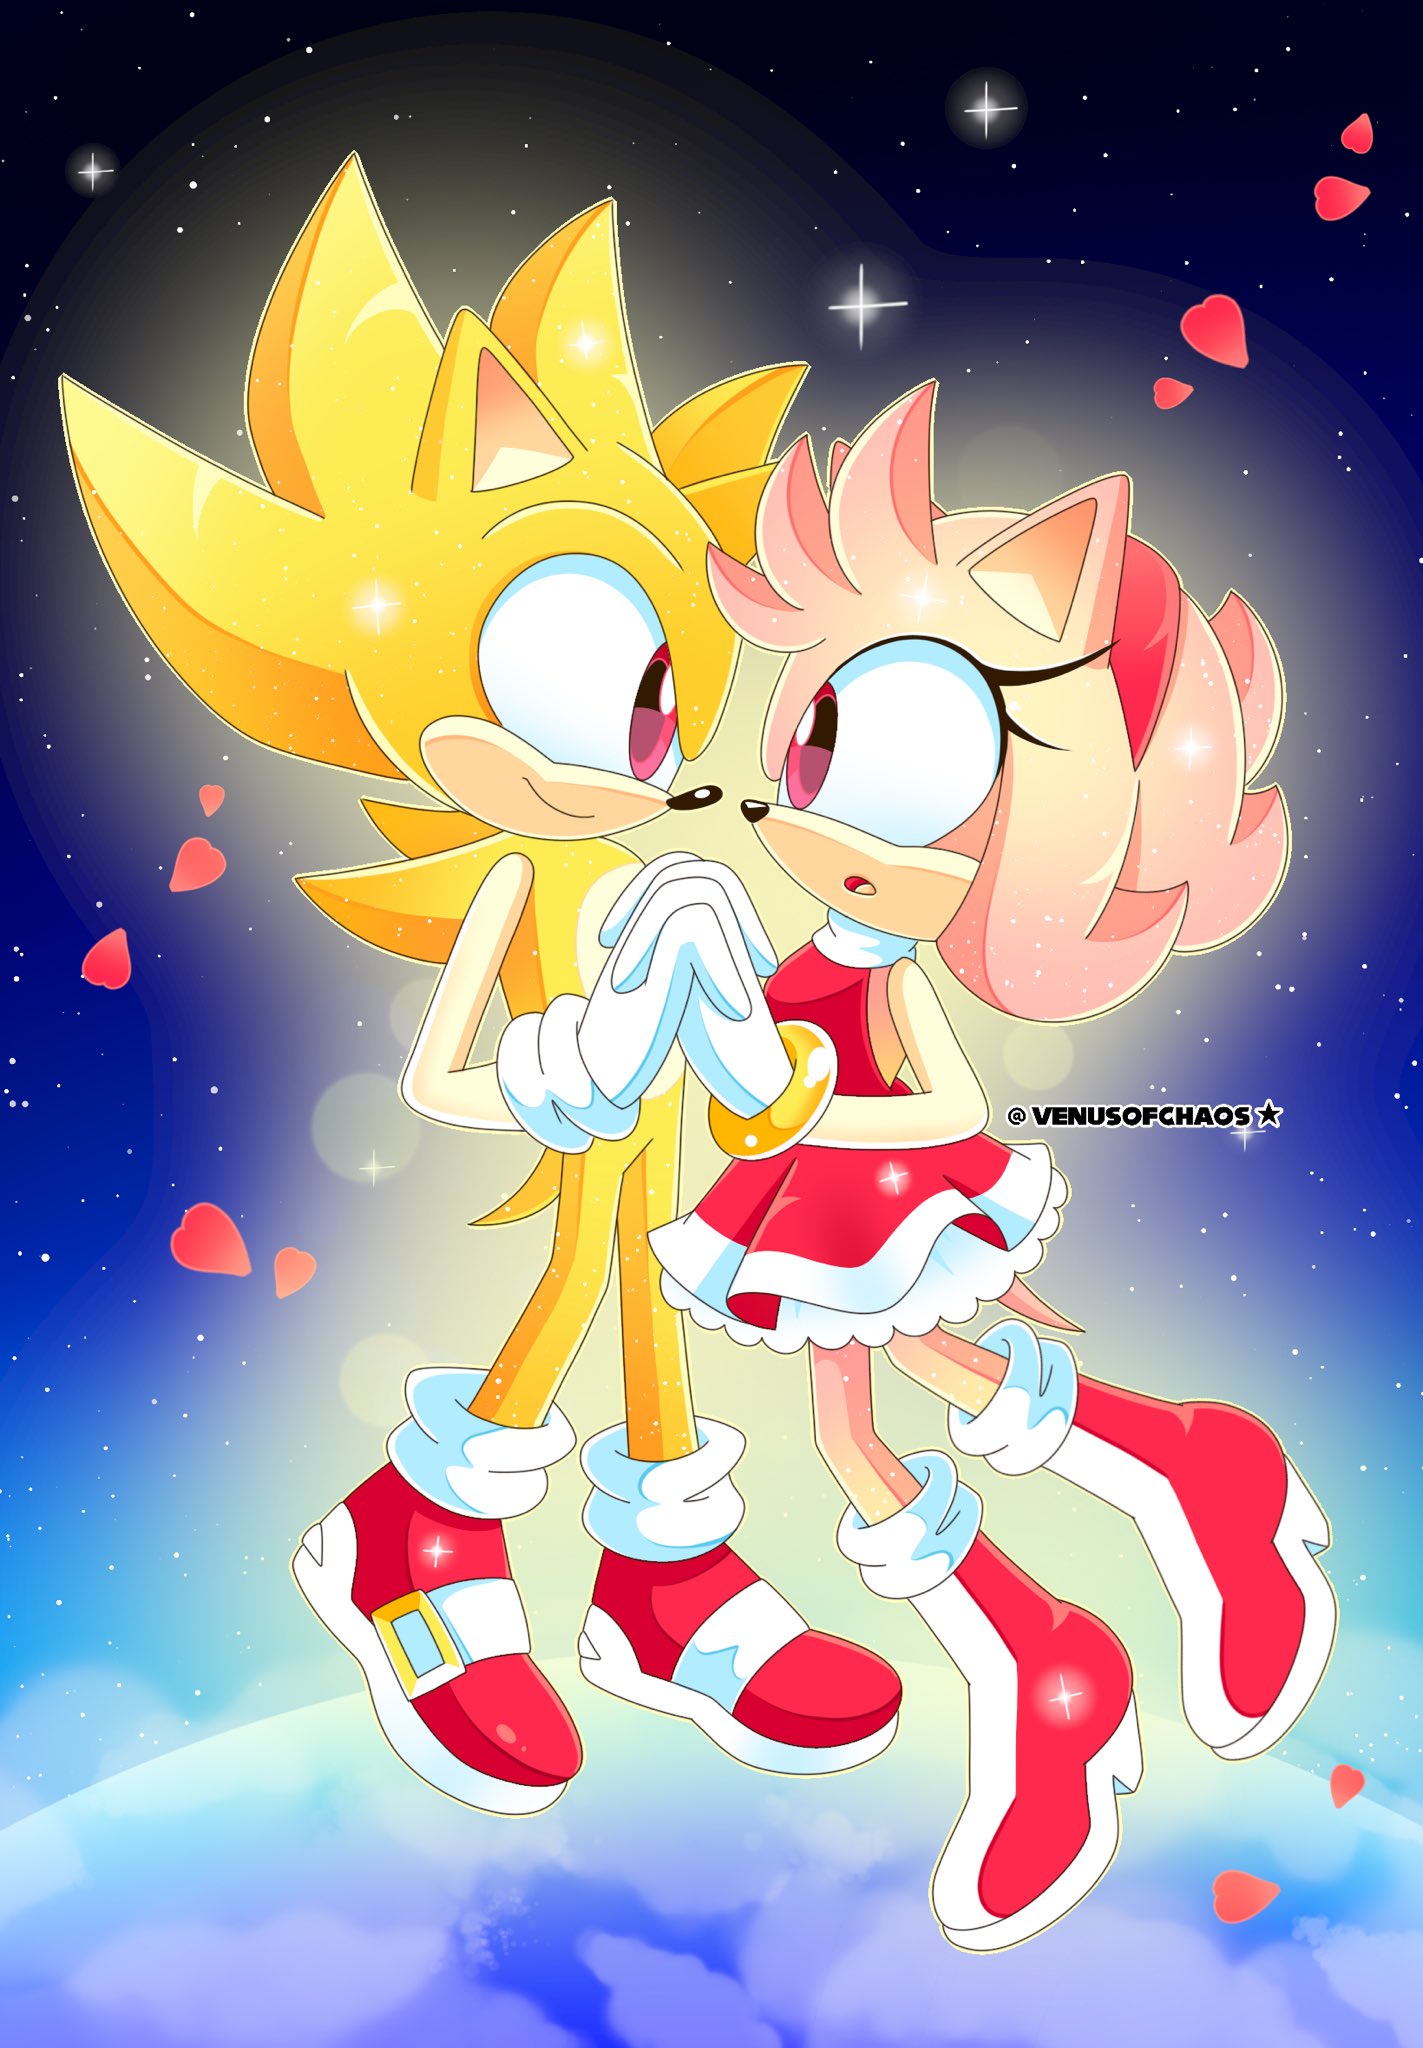 ❄️Winter Venus🔔 COMMS OPEN on X: I love sora sm she reminds me of sonic  in a lot of ways  / X